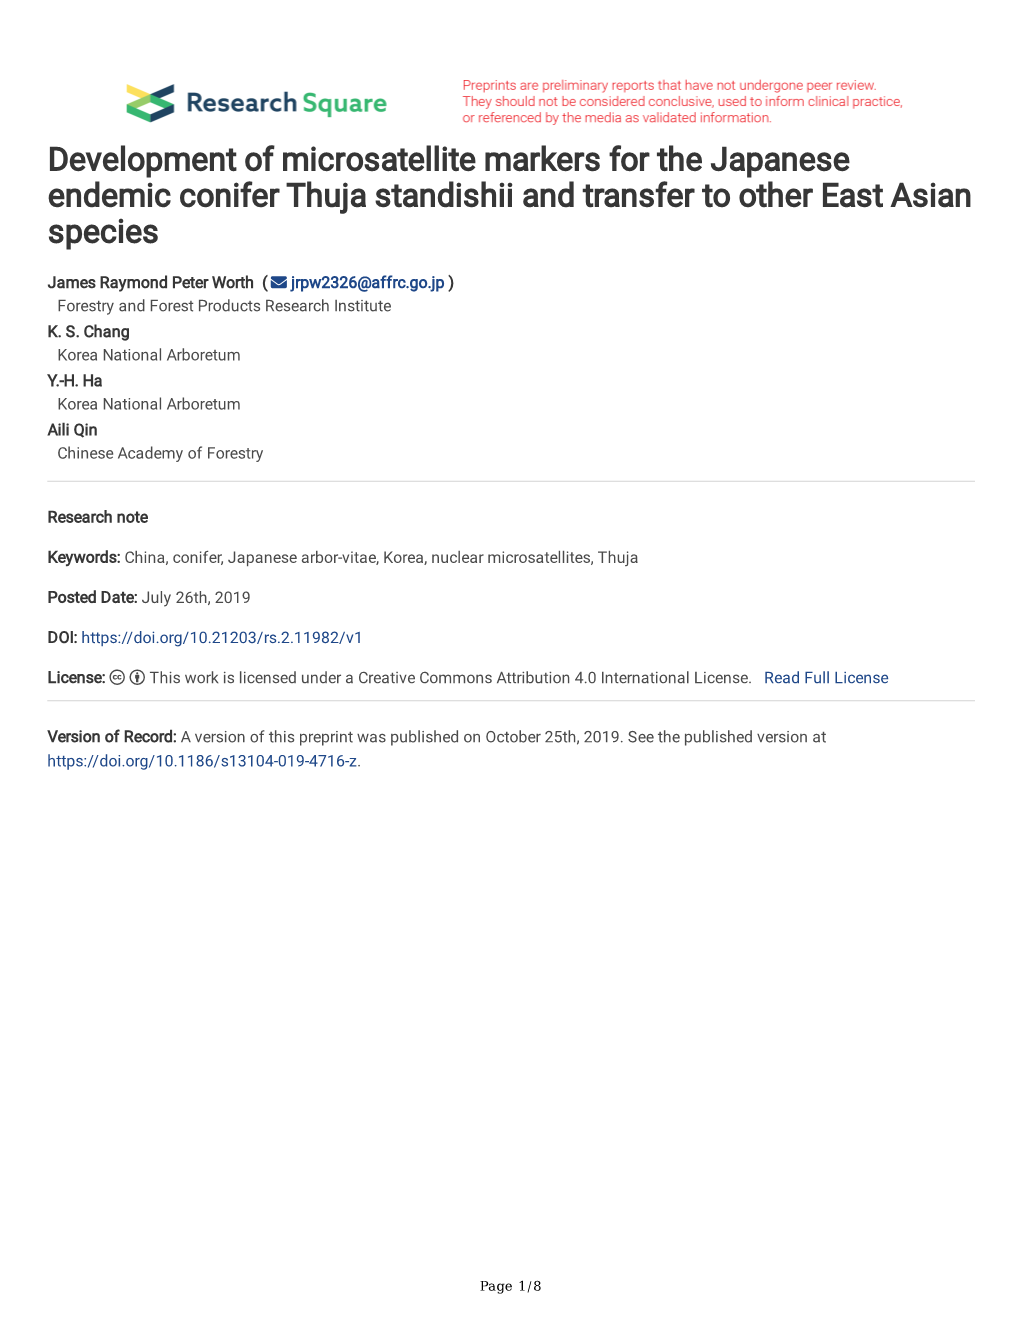 Development of Microsatellite Markers for the Japanese Endemic Conifer Thuja Standishii and Transfer to Other East Asian Species